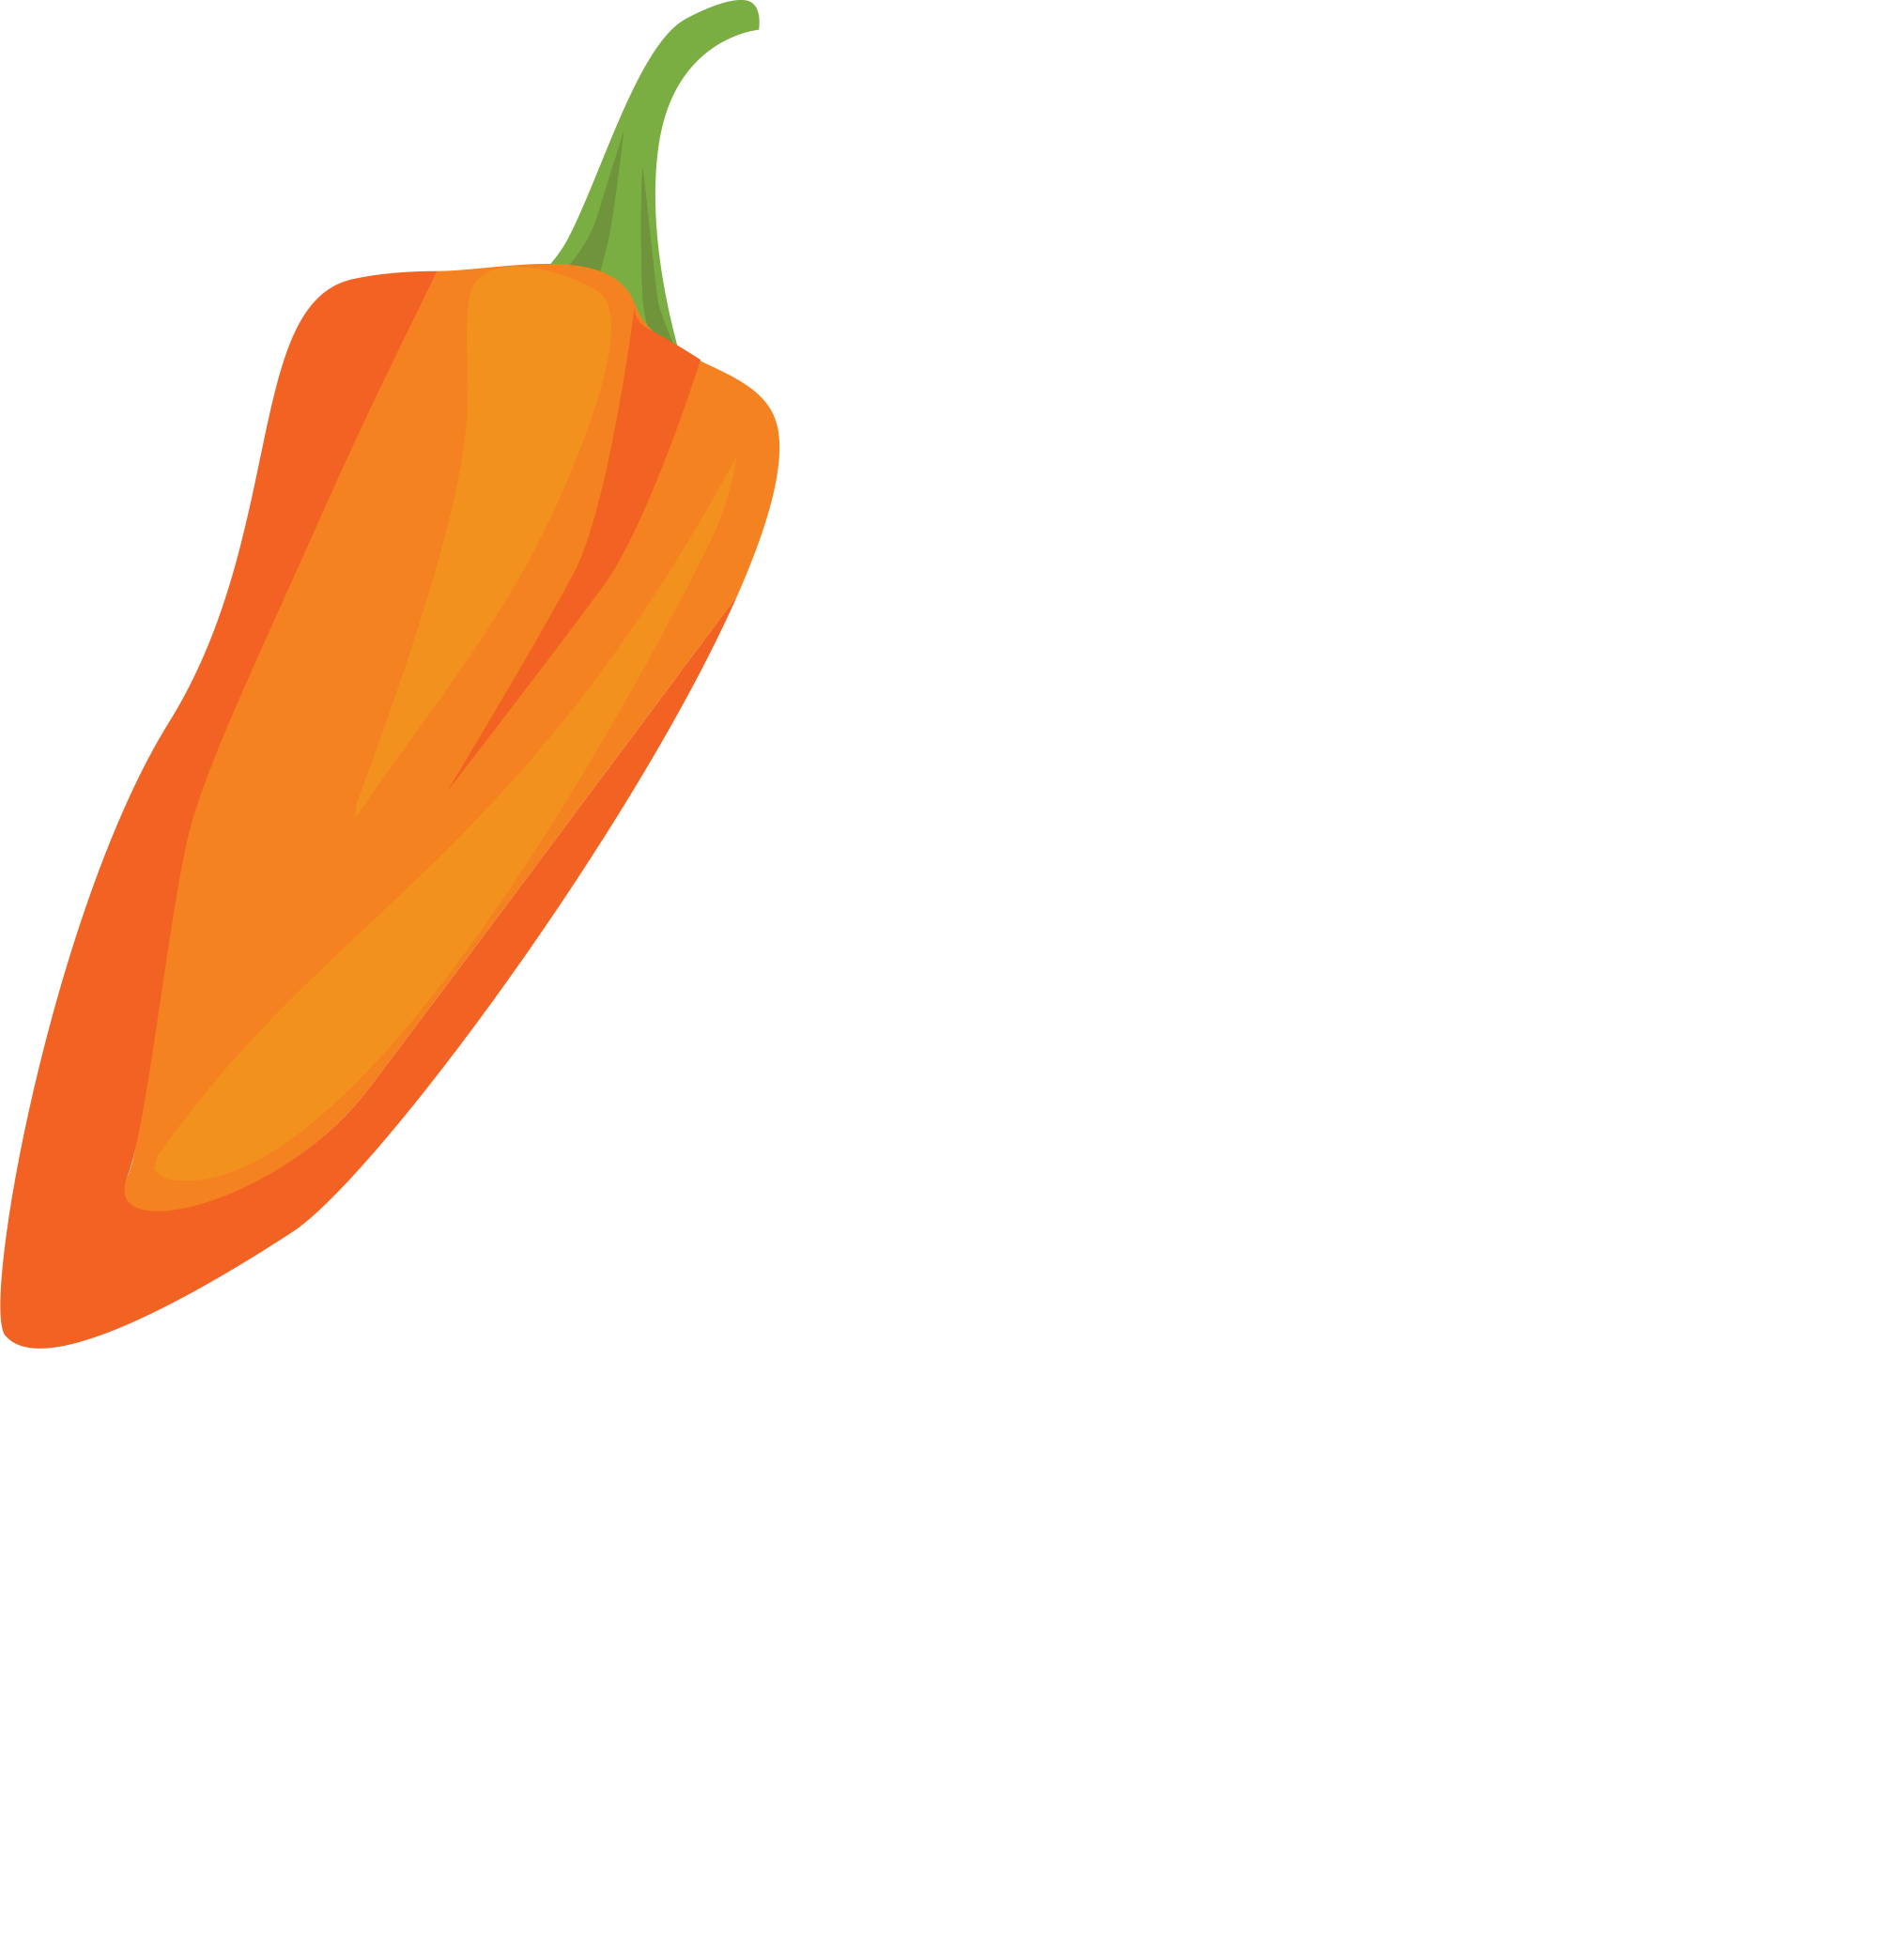 The Associated General Contractors of Alaska logo with chili pepper